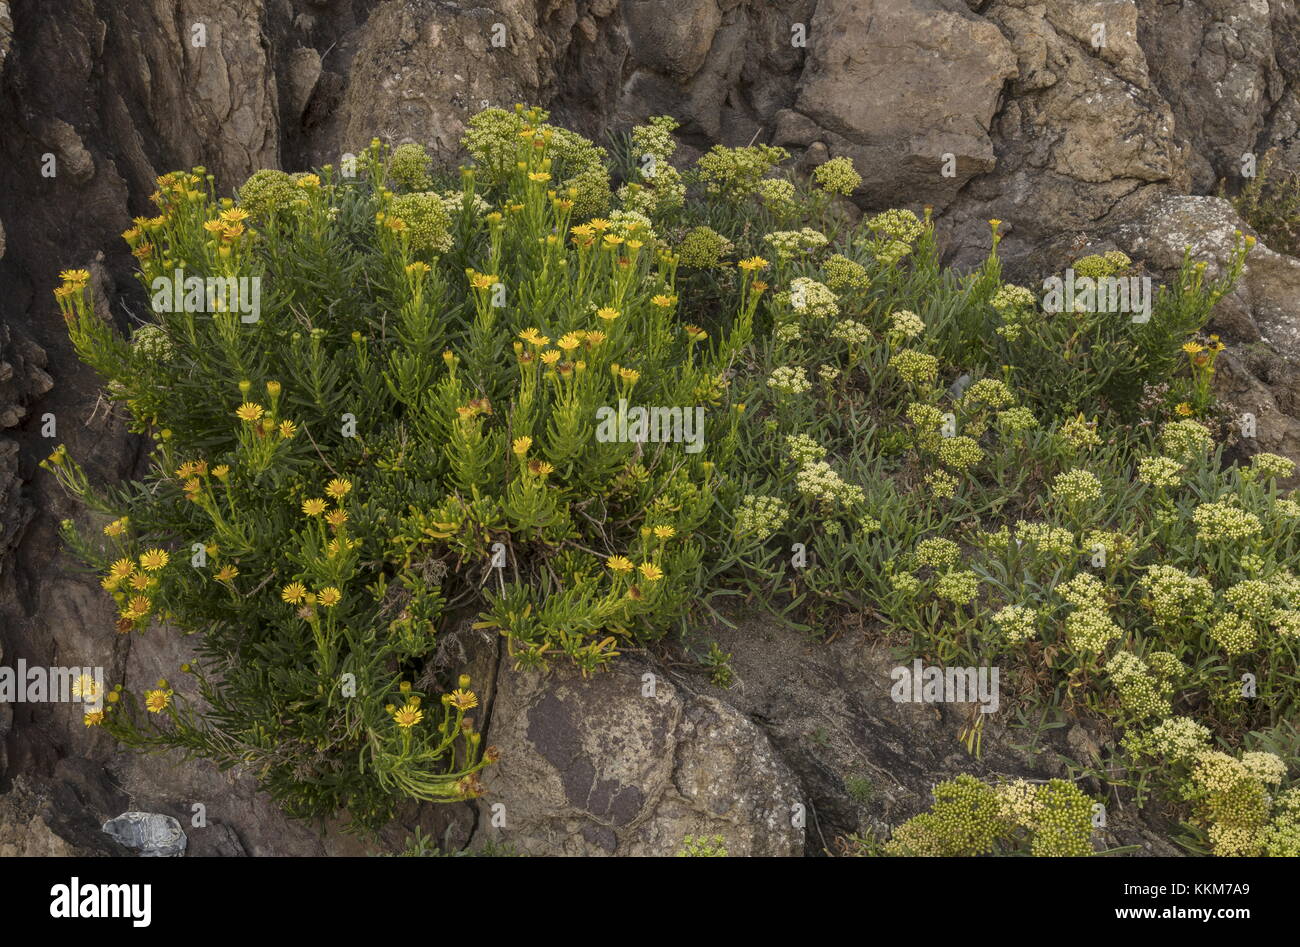 Golden Samphire, Inula crithmoides, with Rock Samphire, in flower on rocky coast, Anglesey. Stock Photo